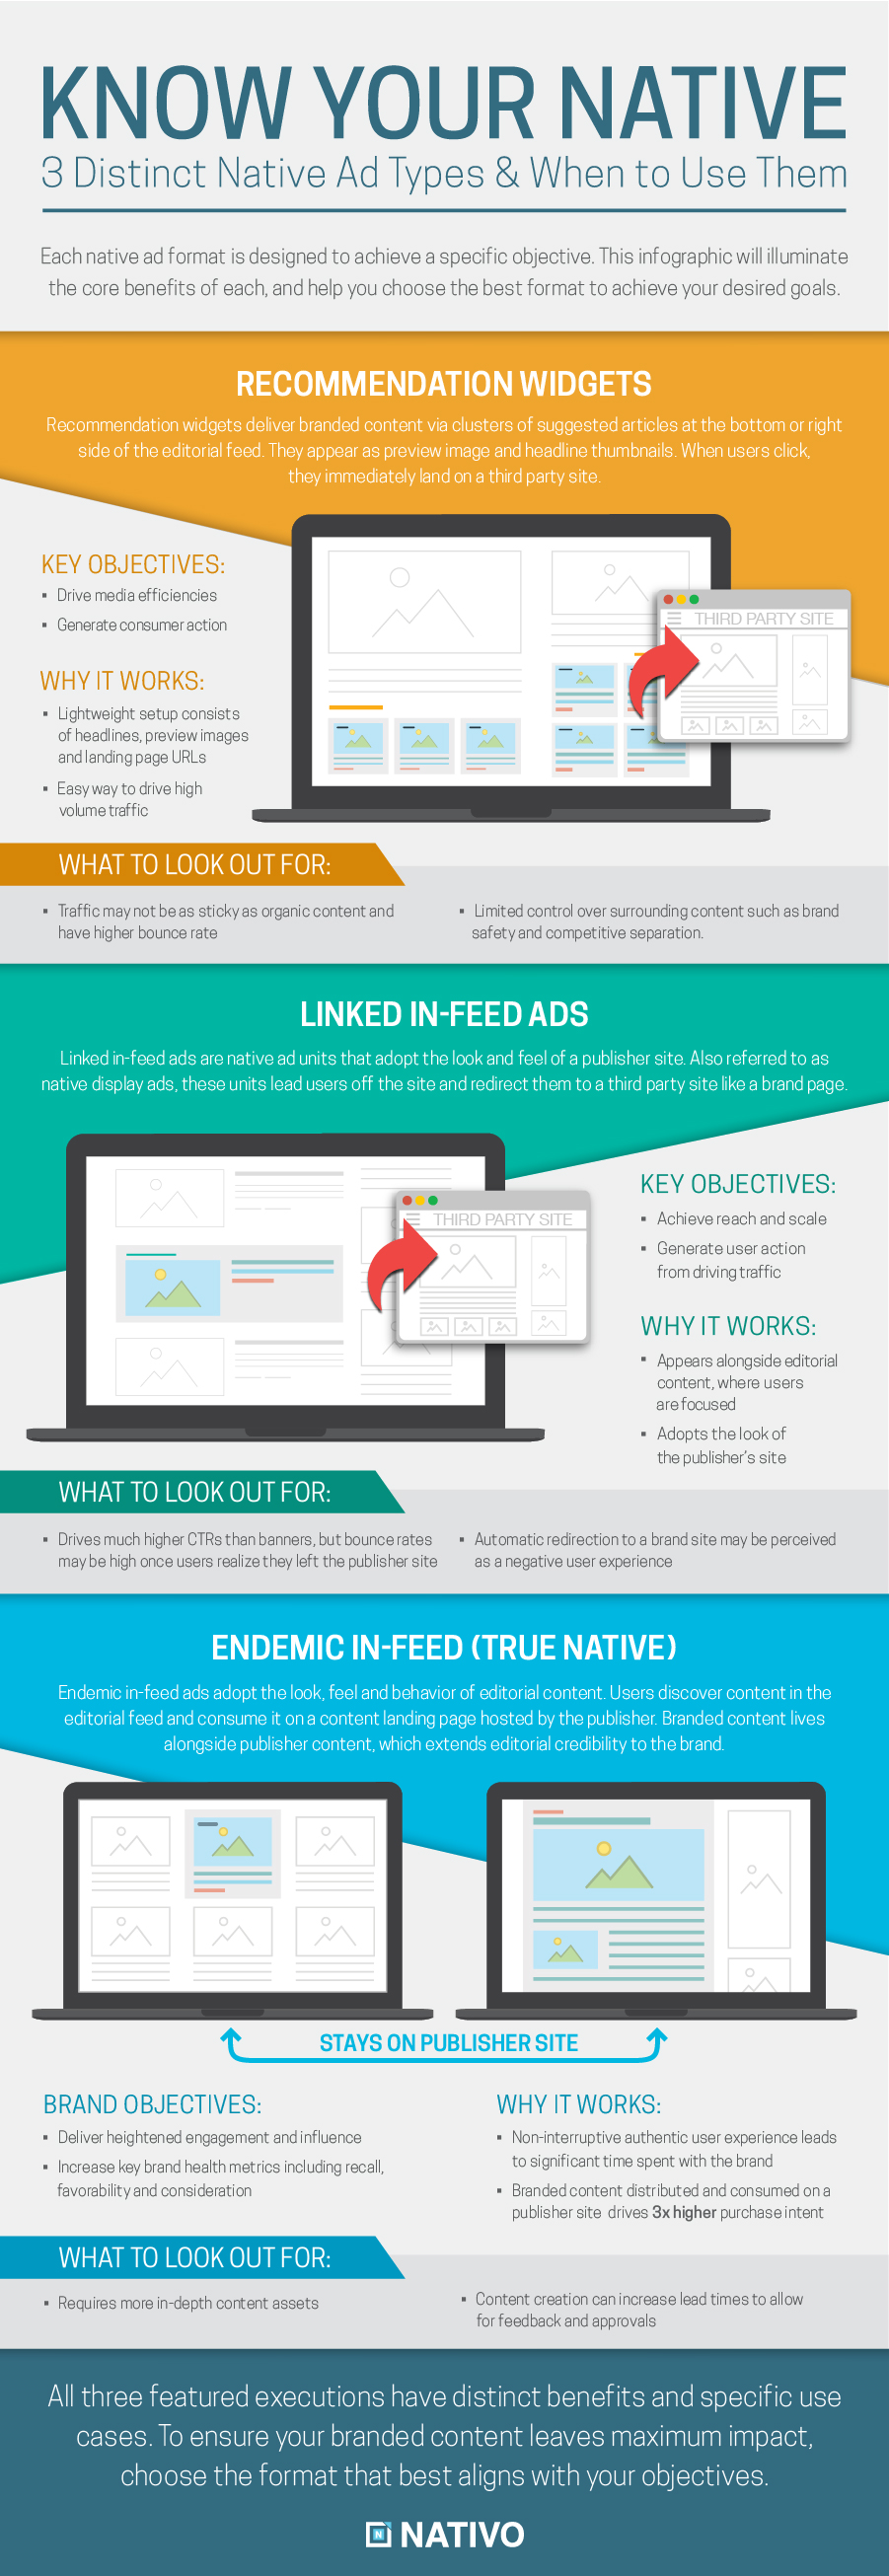 headline-three-native-ad-types-and-how-to-use-them-digiday-inforgraphic-byline-series-3-native-ad-types-know-your-native